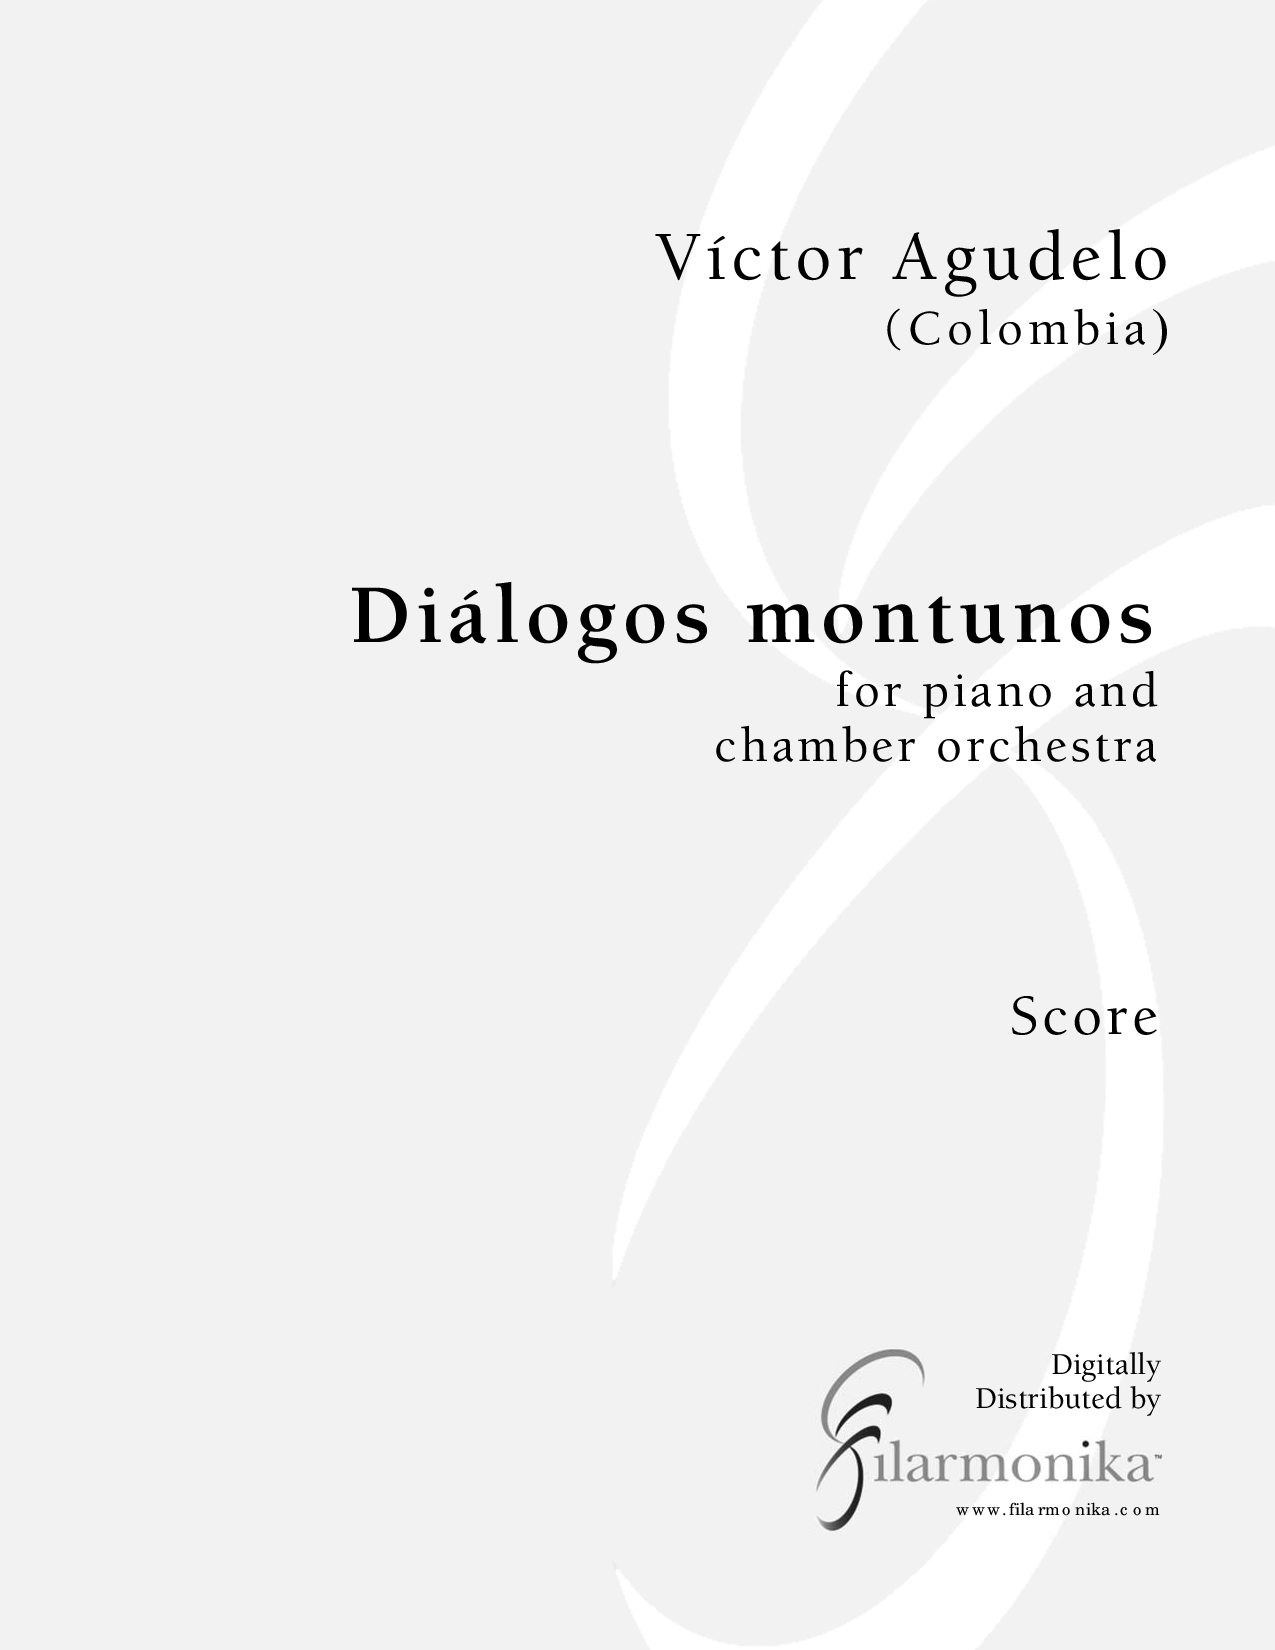 Diálogos montunos, for piano and orchestra